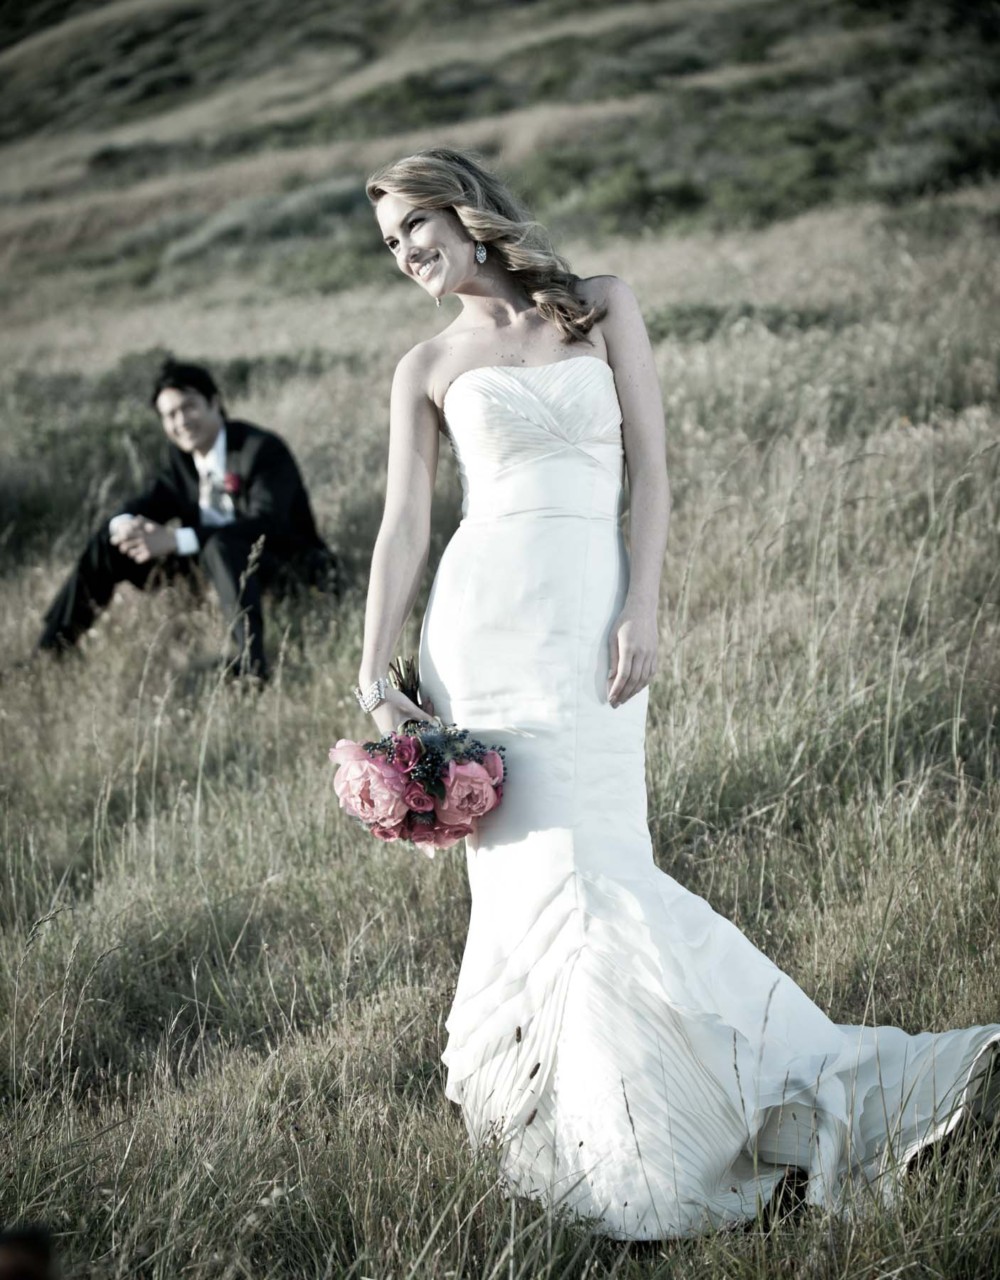 Looking for a summer wedding photographer in Palmer?